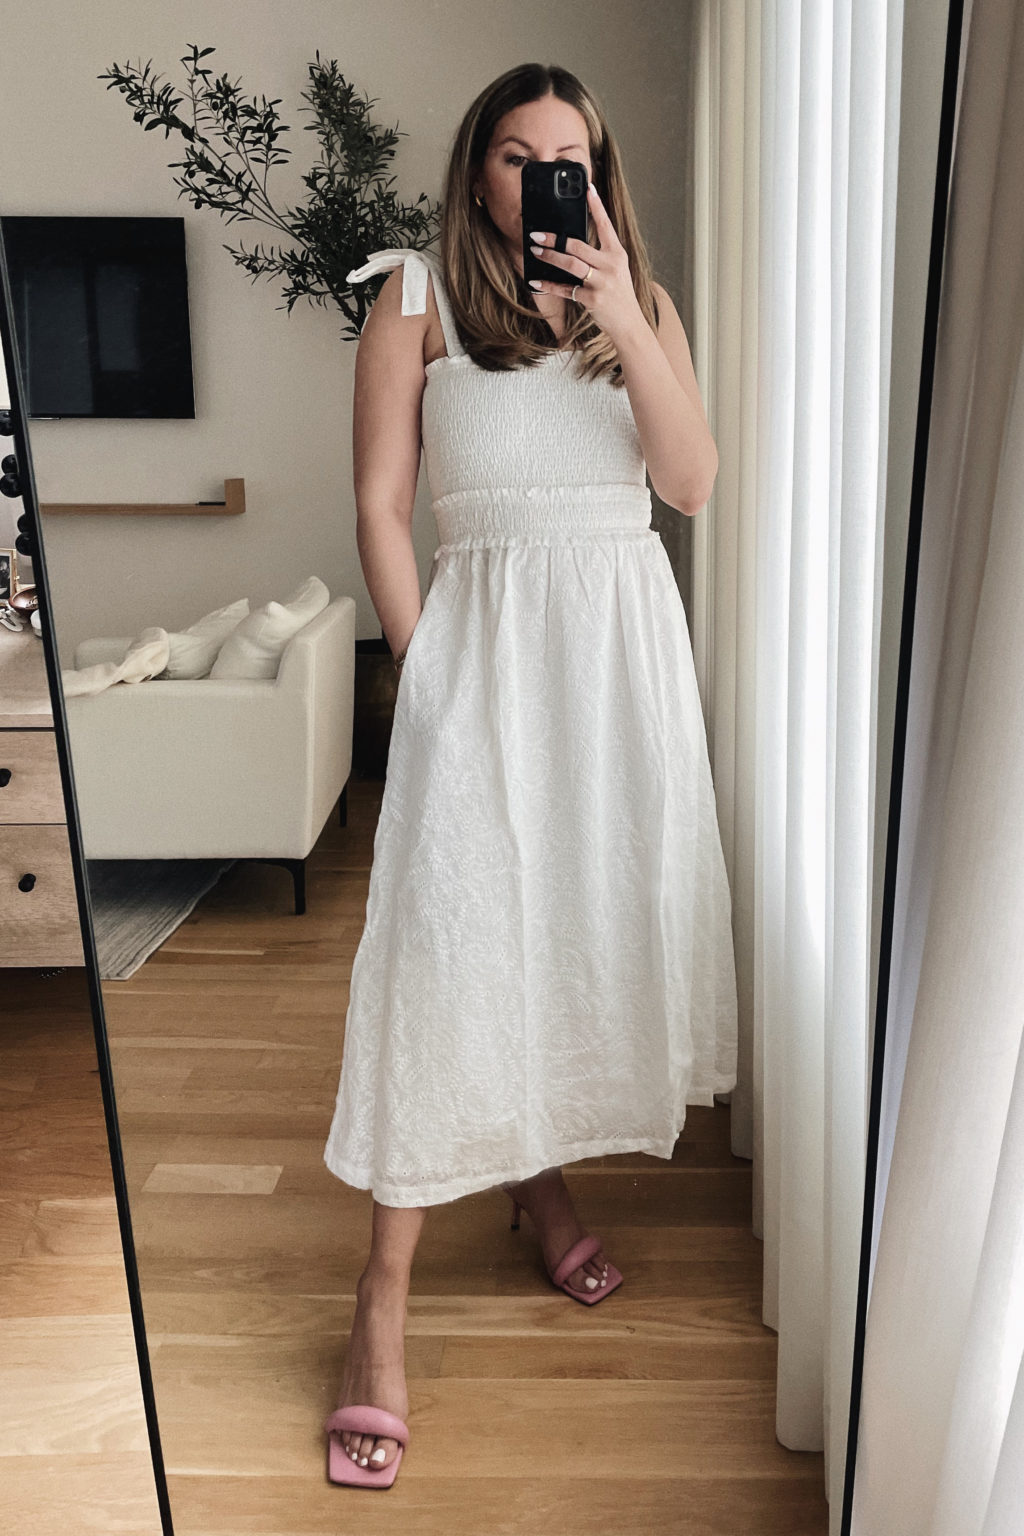 Casual Dress Styles I’m Into For Summer